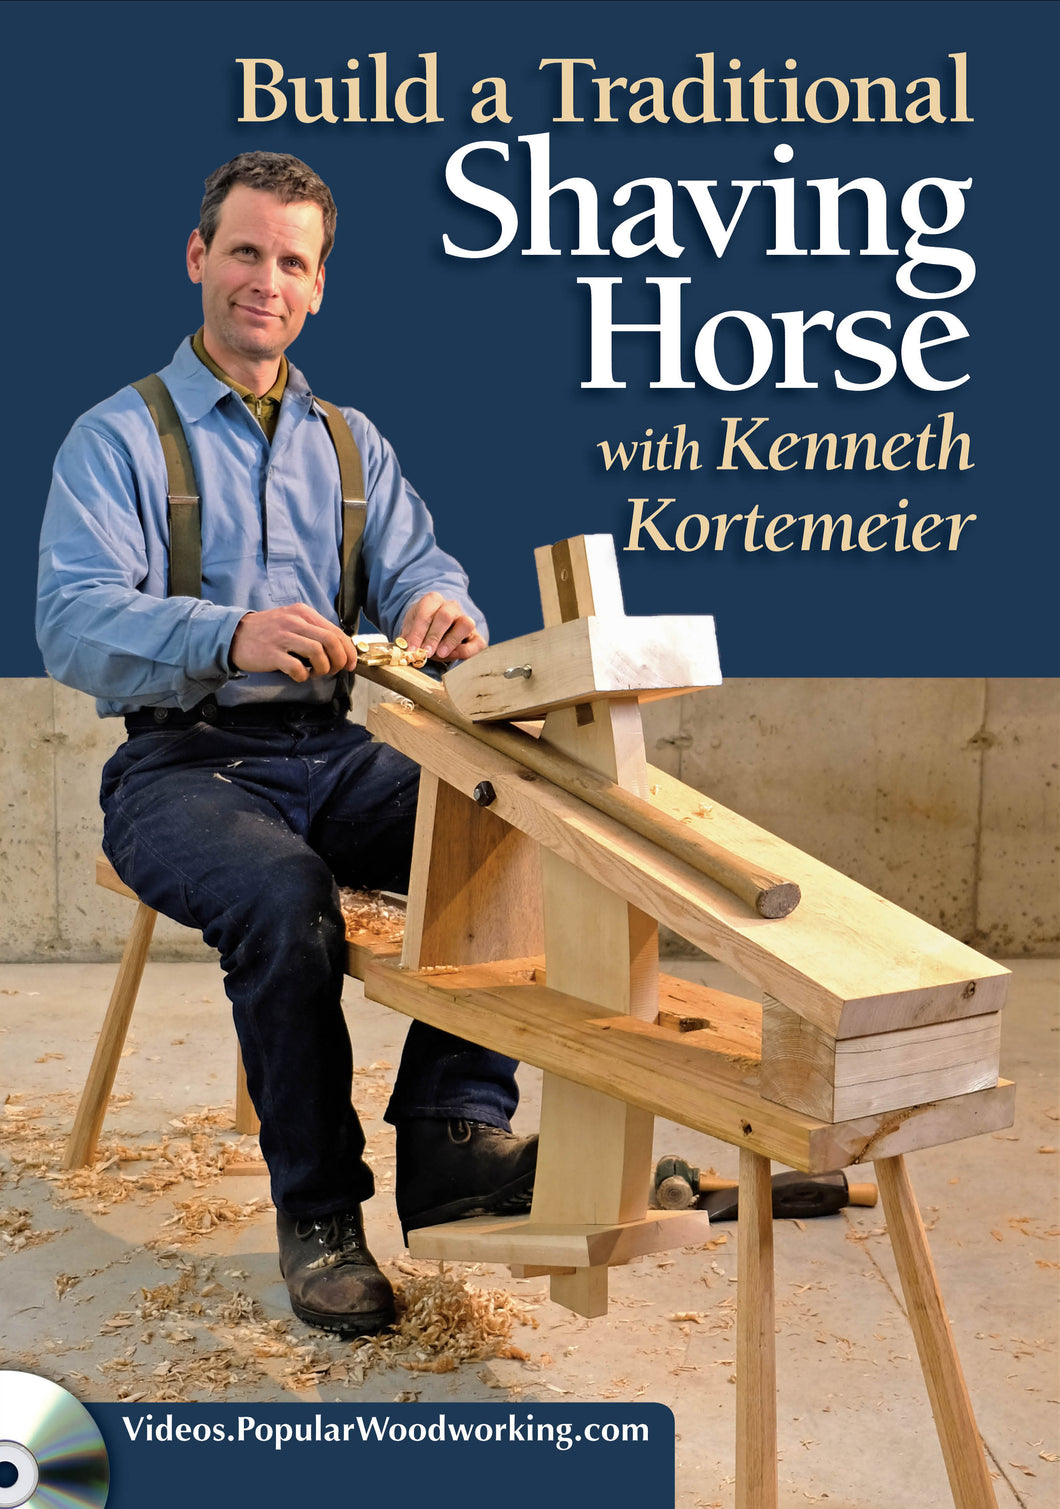 Build a Traditional Shaving Horse Video Download